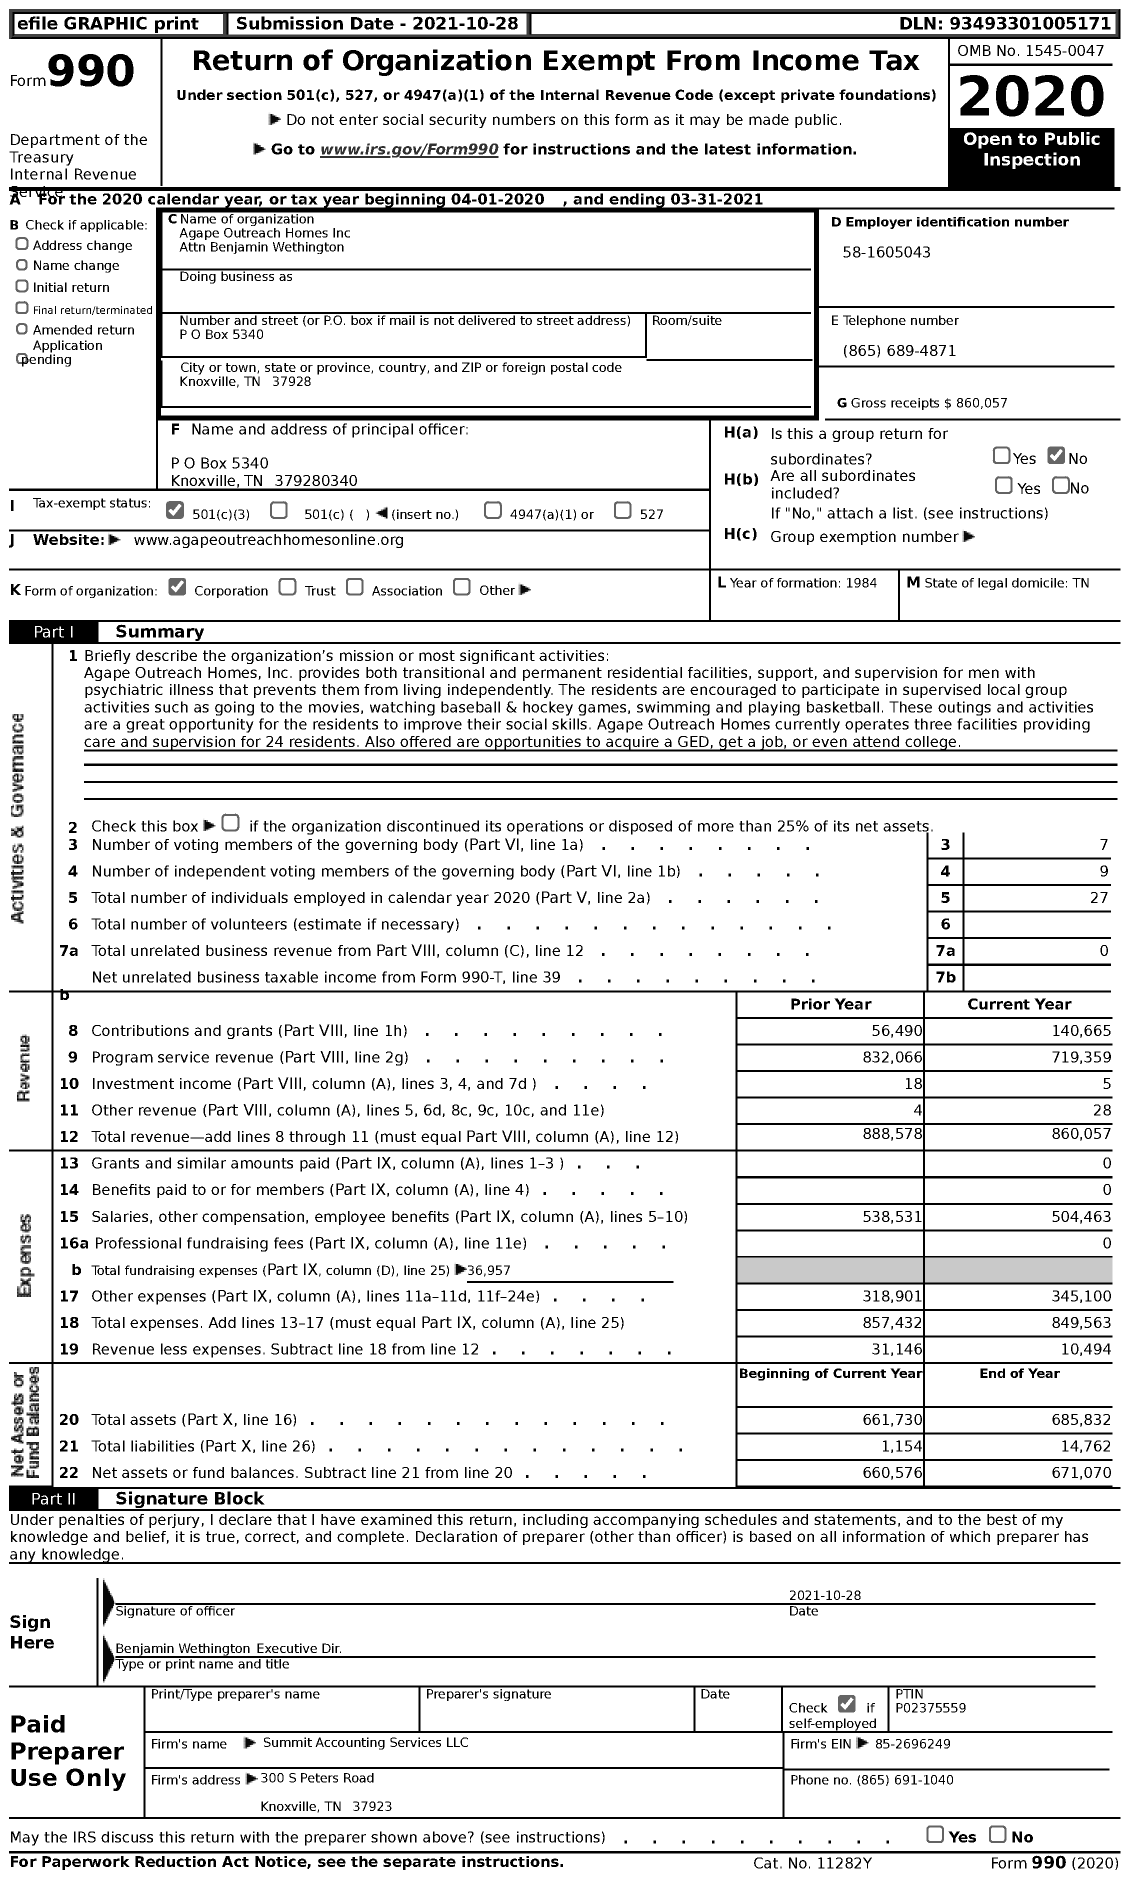 Image of first page of 2020 Form 990 for Agape Outreach Homes Inc Attn Benjamin Wethington